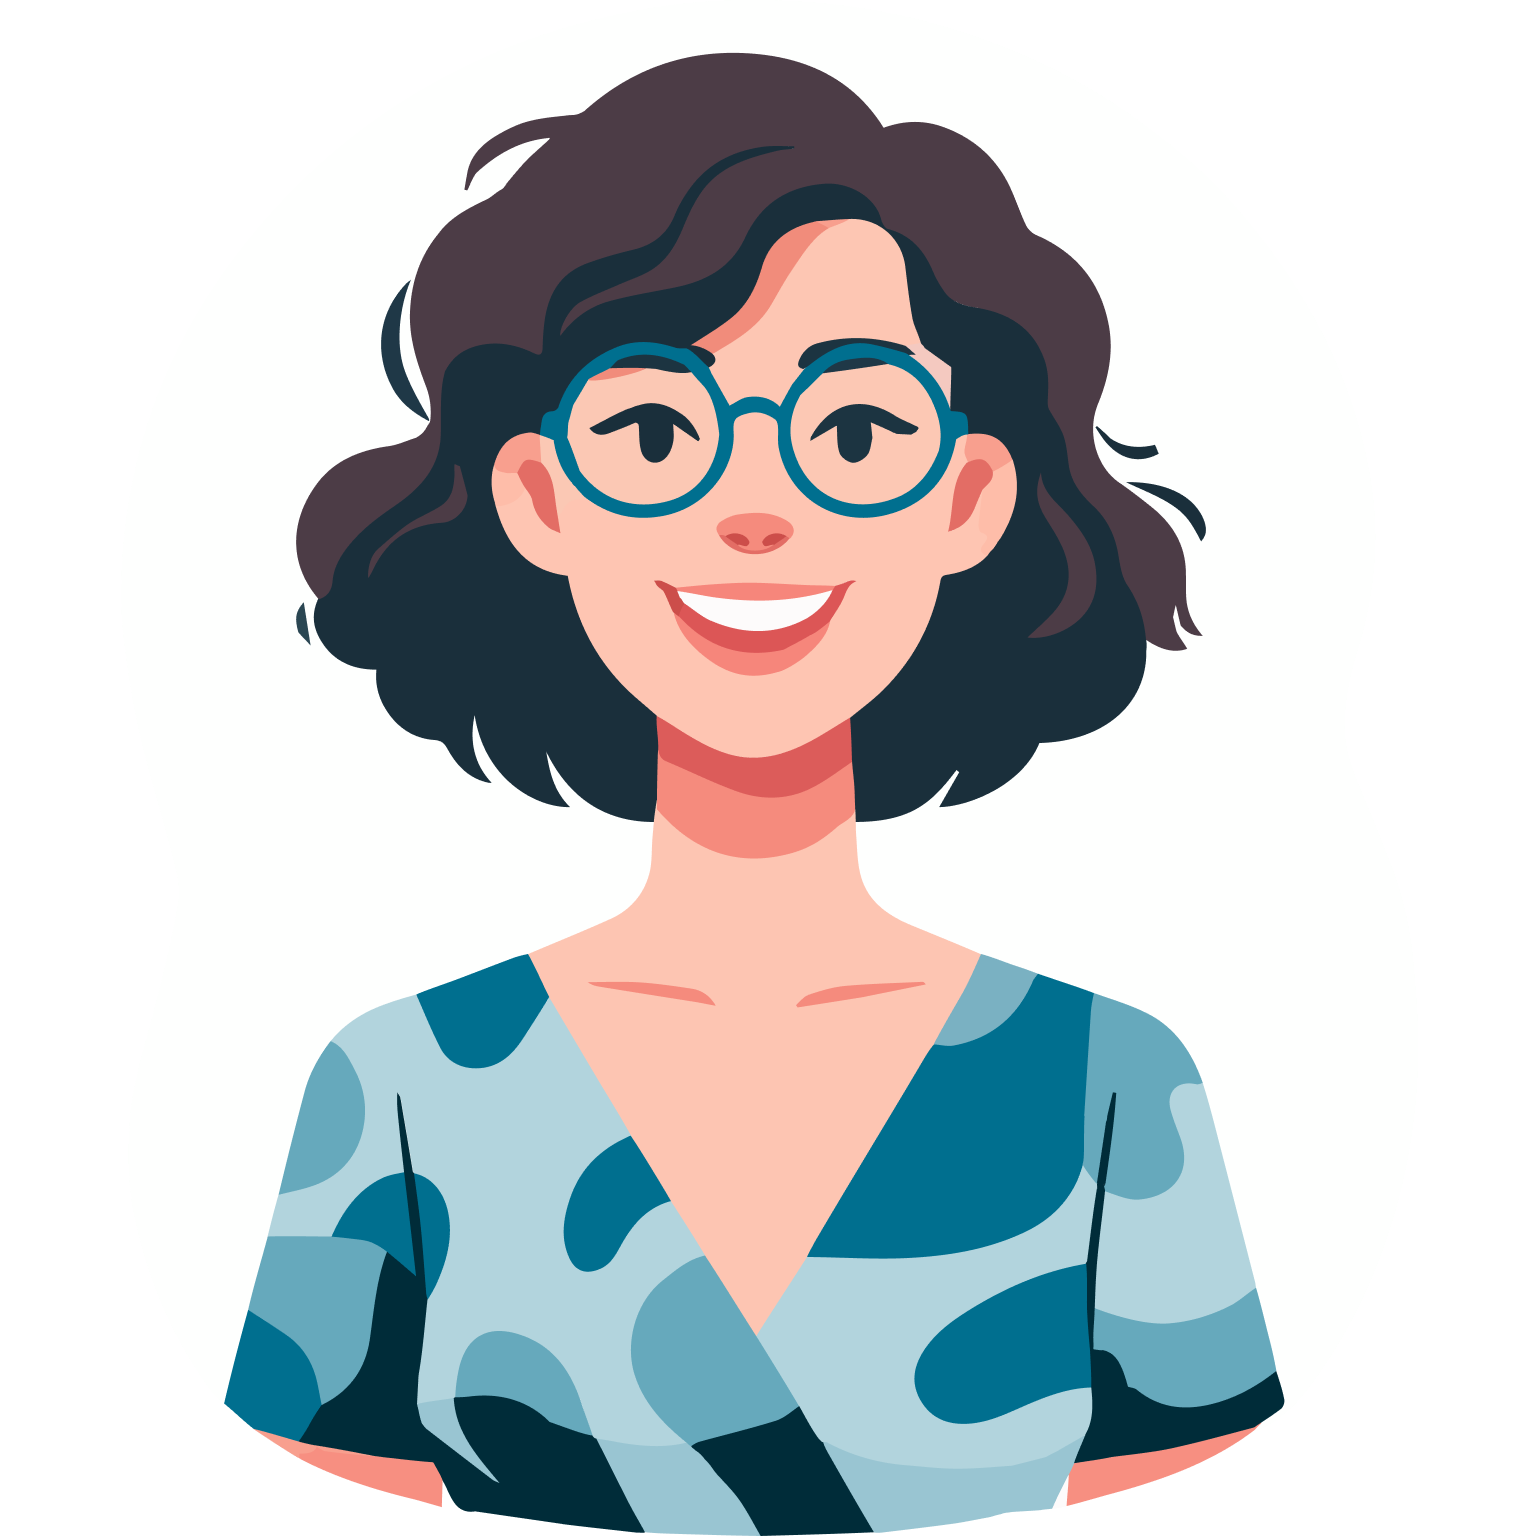 illustration of a smiling latine woman with short, dark, curly hair and wearing glasses